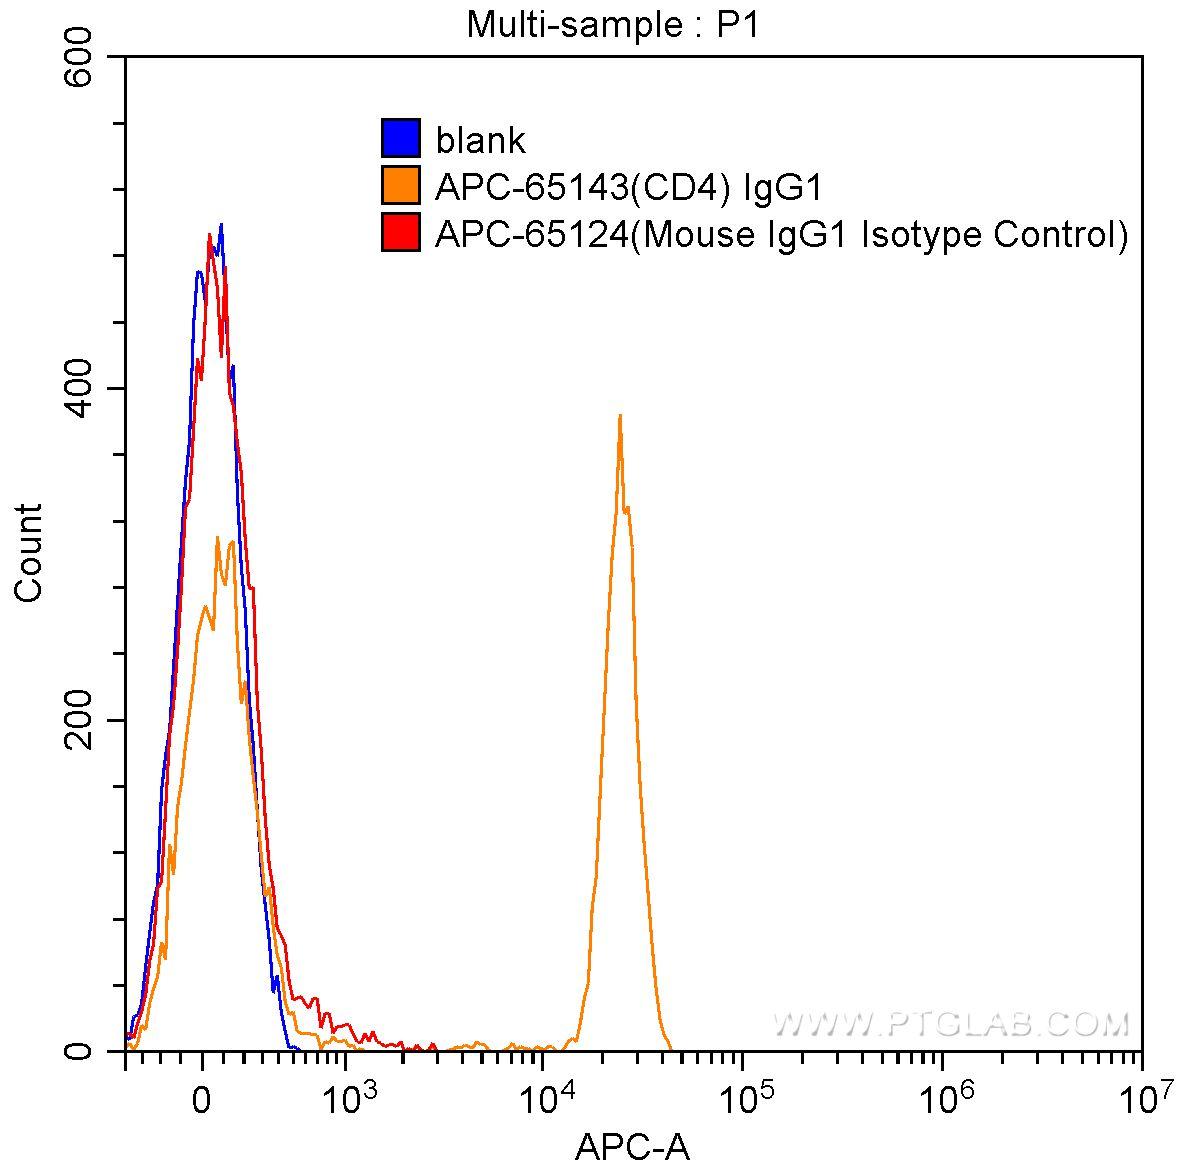 1X10^6 human peripheral blood lymphocytes were surface stained with 0.50 ug APC Mouse IgG1 Isotype Control (APC-65124, clone: MOPC-21) (red) or with 0.50 ug APC Anti-Human CD4 (APC-65143, clone: RPA-T4) (orange), or not stained (blank) (blue). Samples were not fixed.